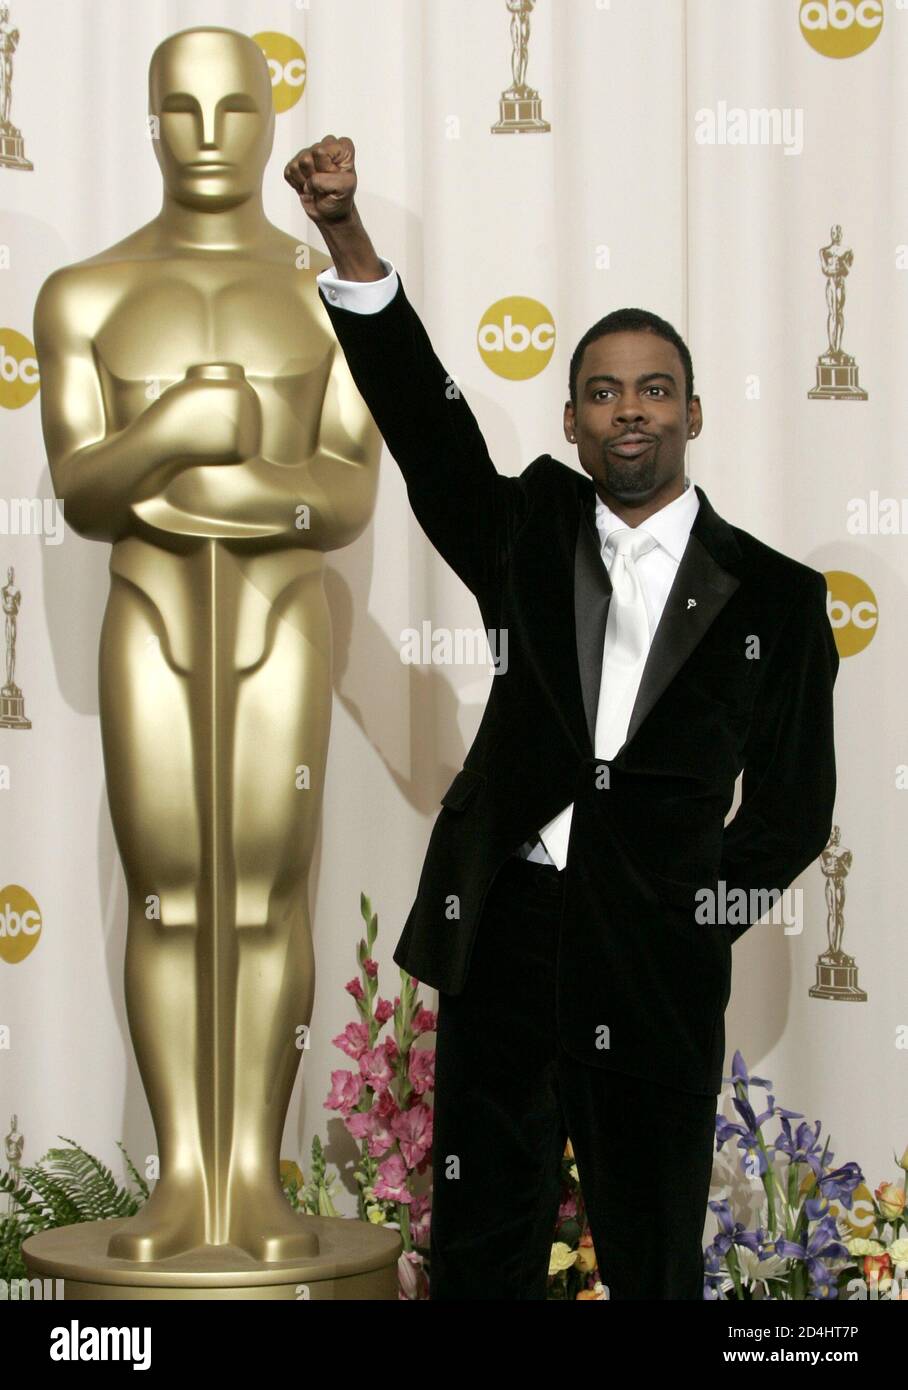 Chris Rock Academy Awards High Resolution Stock Photography and Images -  Alamy